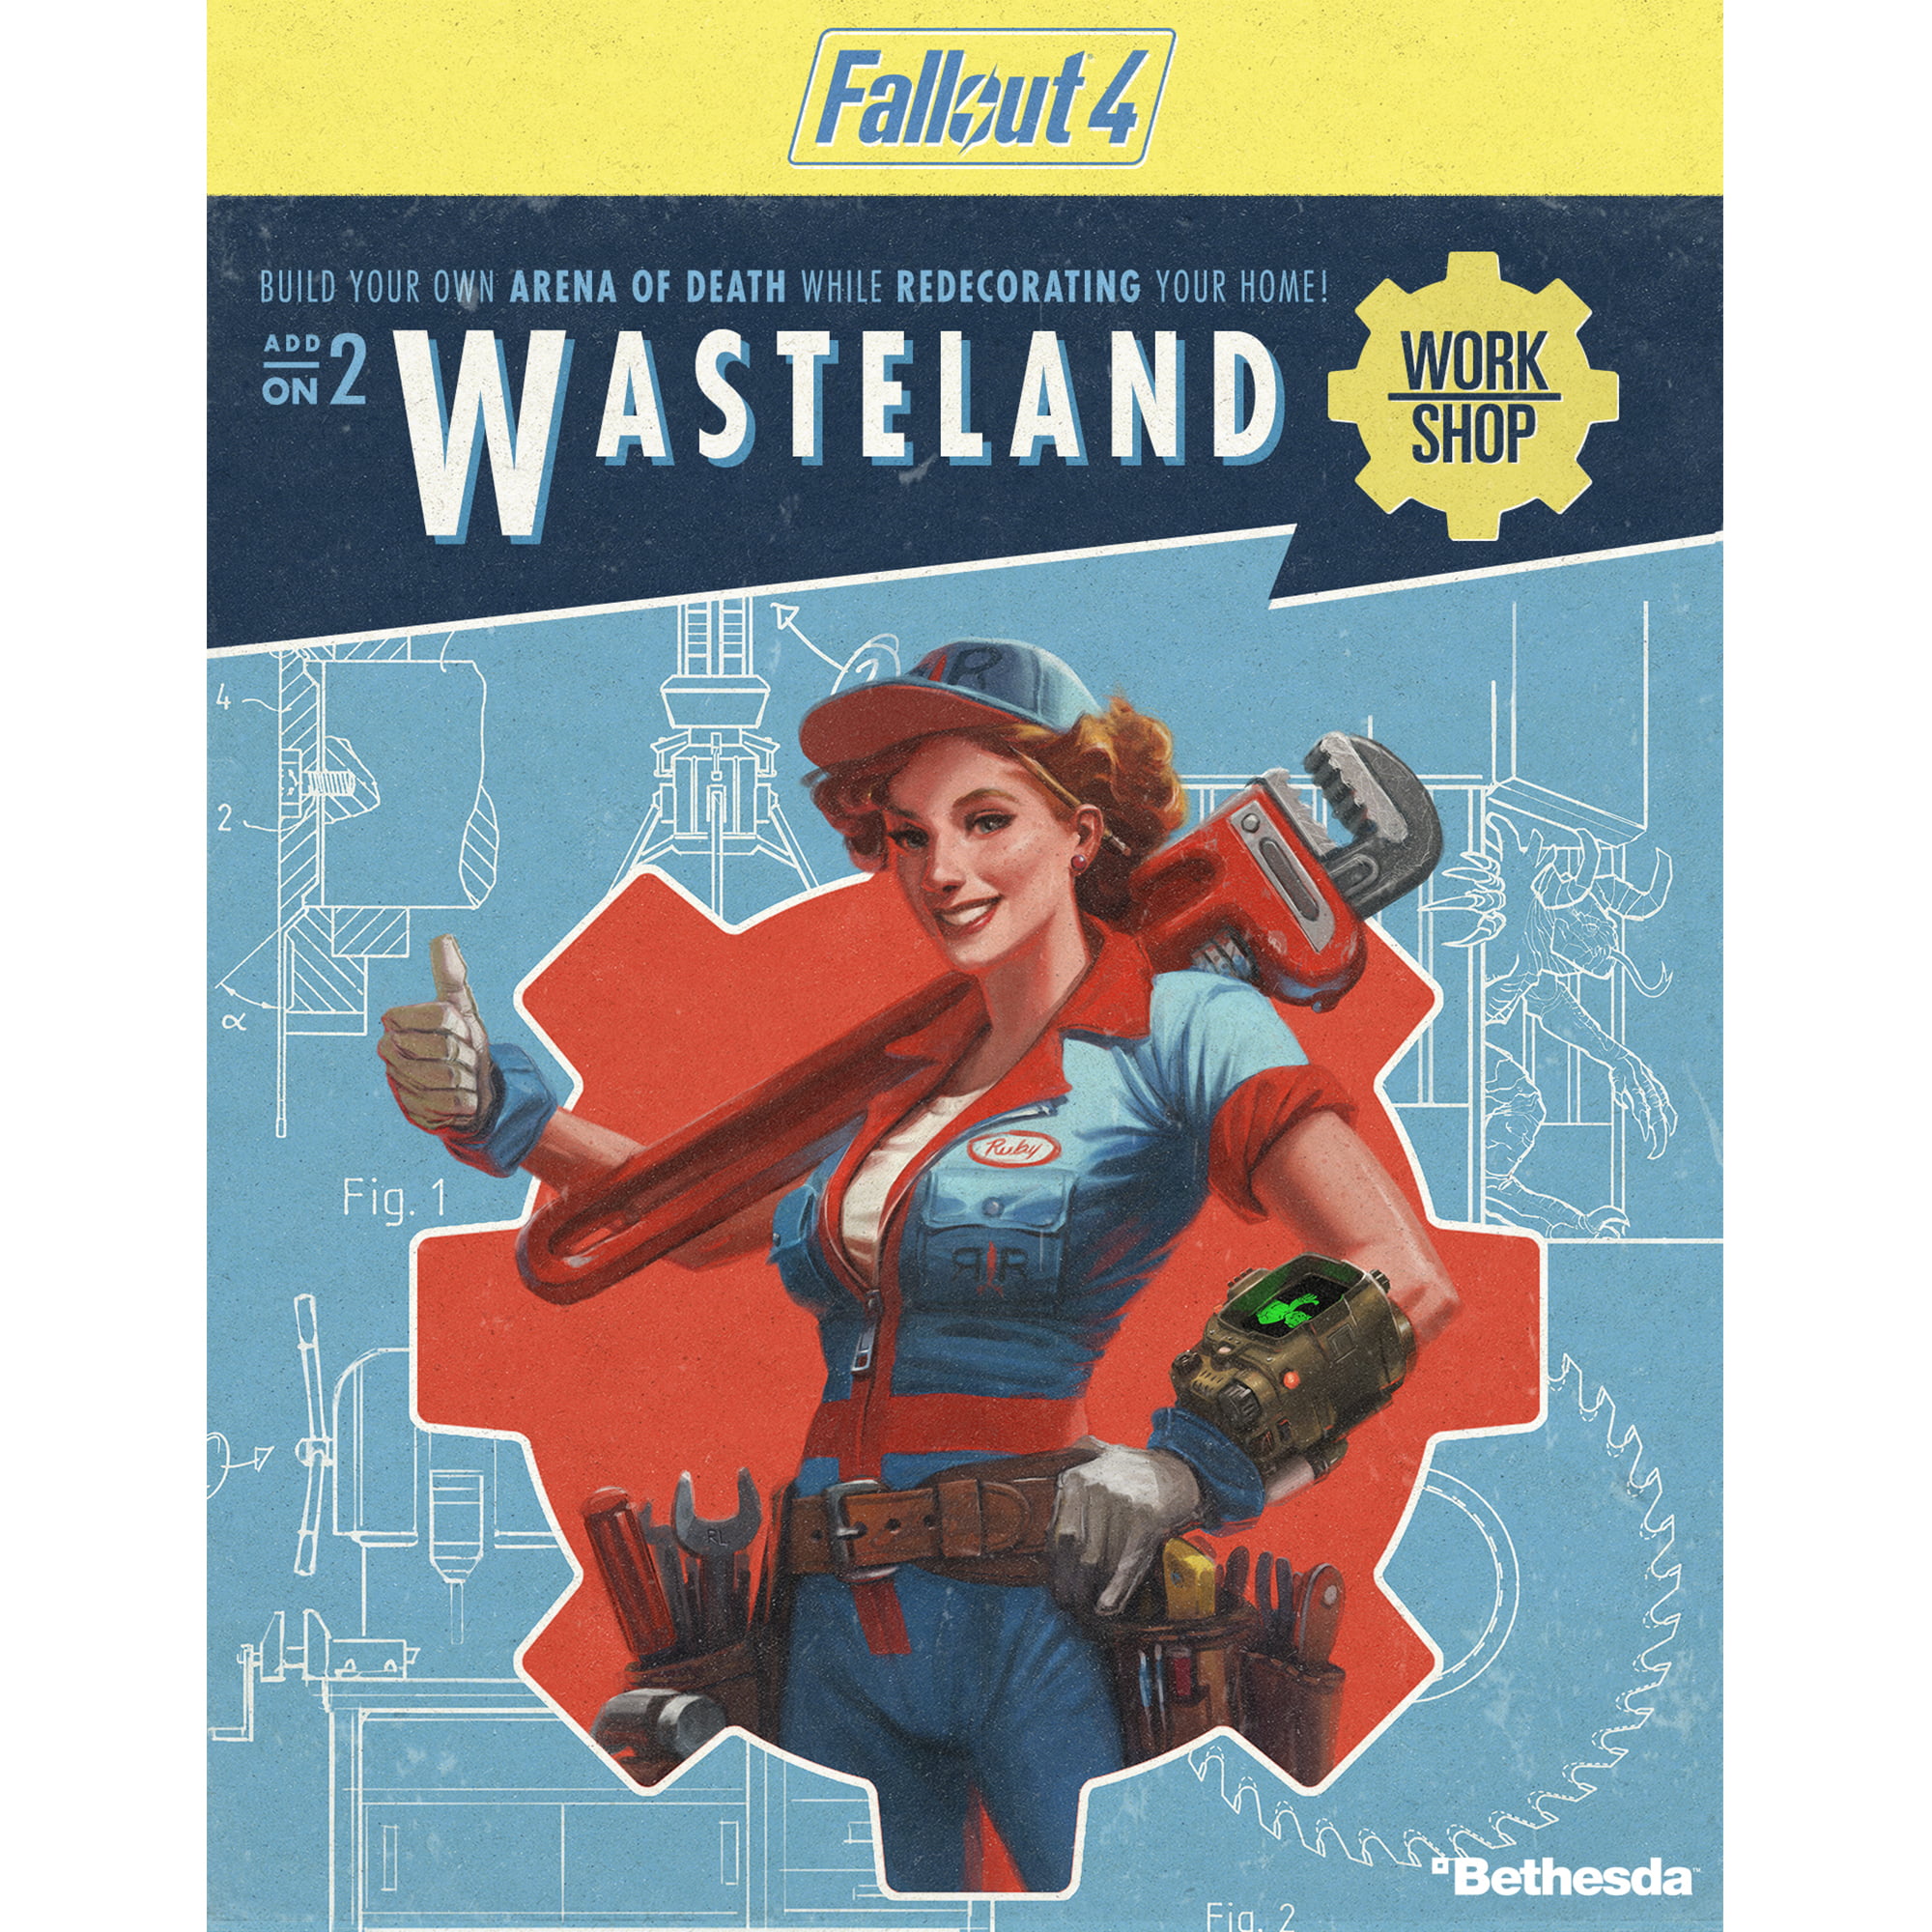 Clean wasteland workshop fallout 4 фото 66